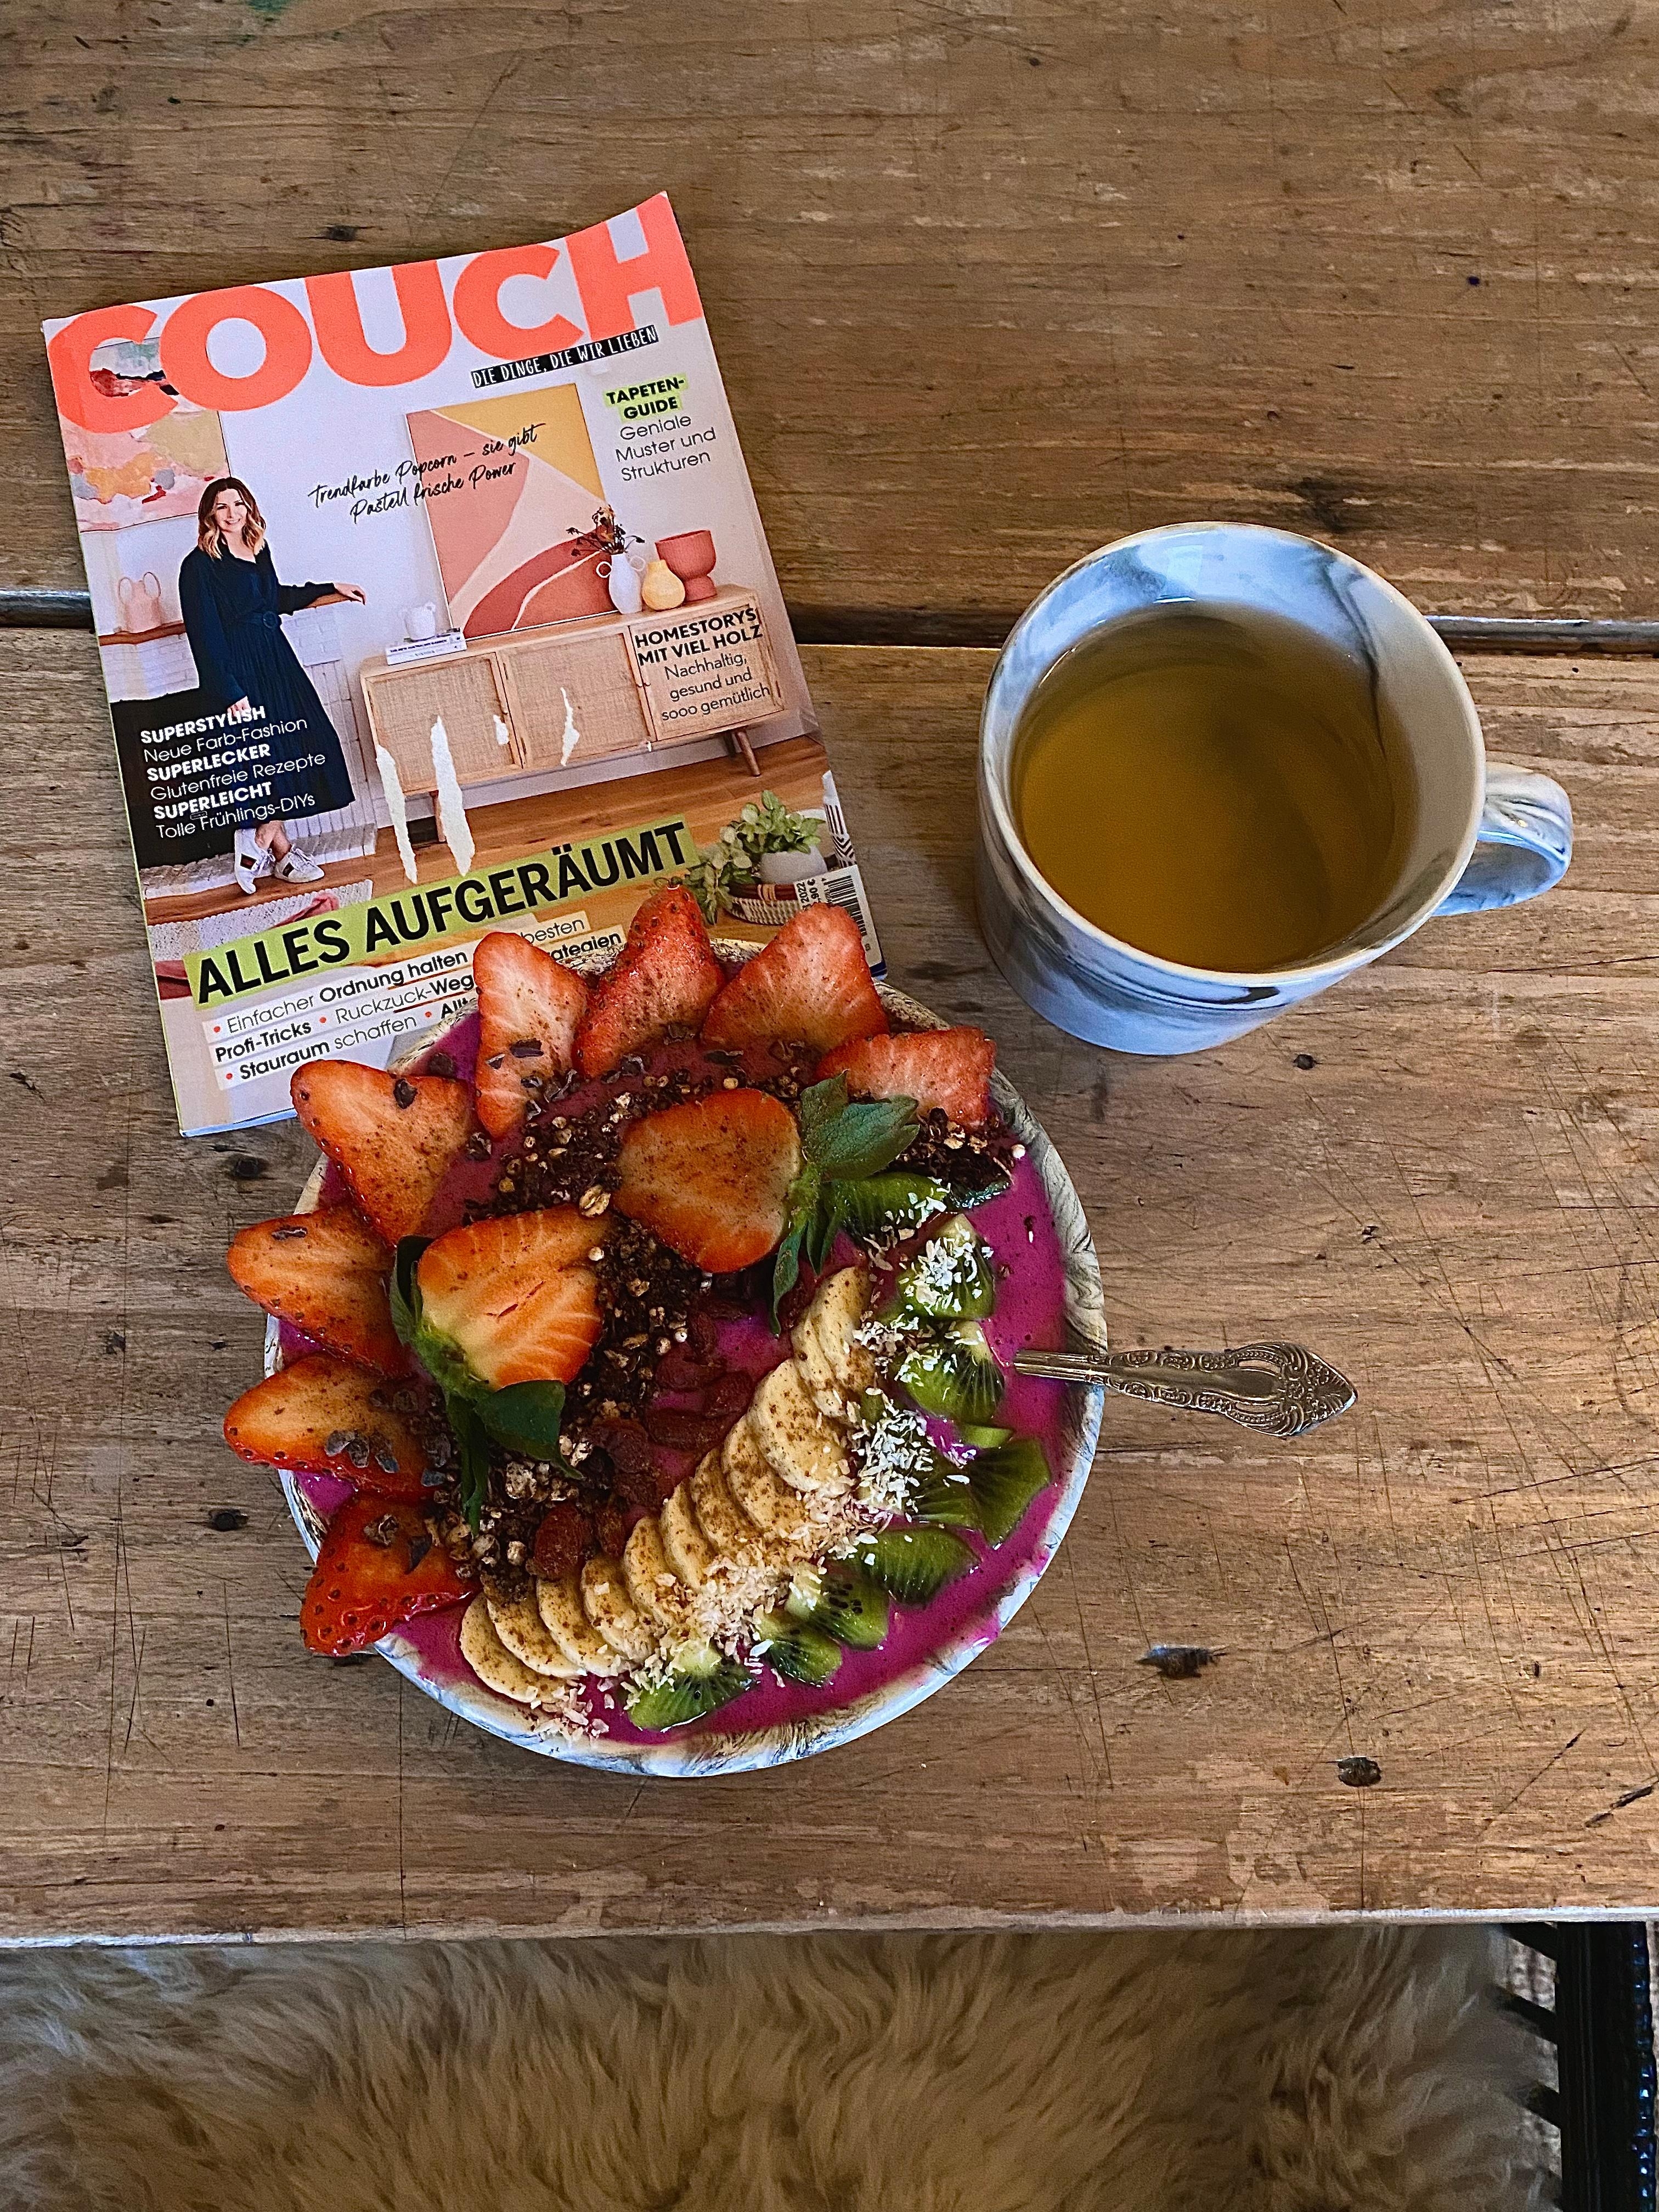 Breakfast looking good today 🌈 
#eattherainbow #greentea #wholey #smoothiebowl #favouritemagazine #couchcouchcouch